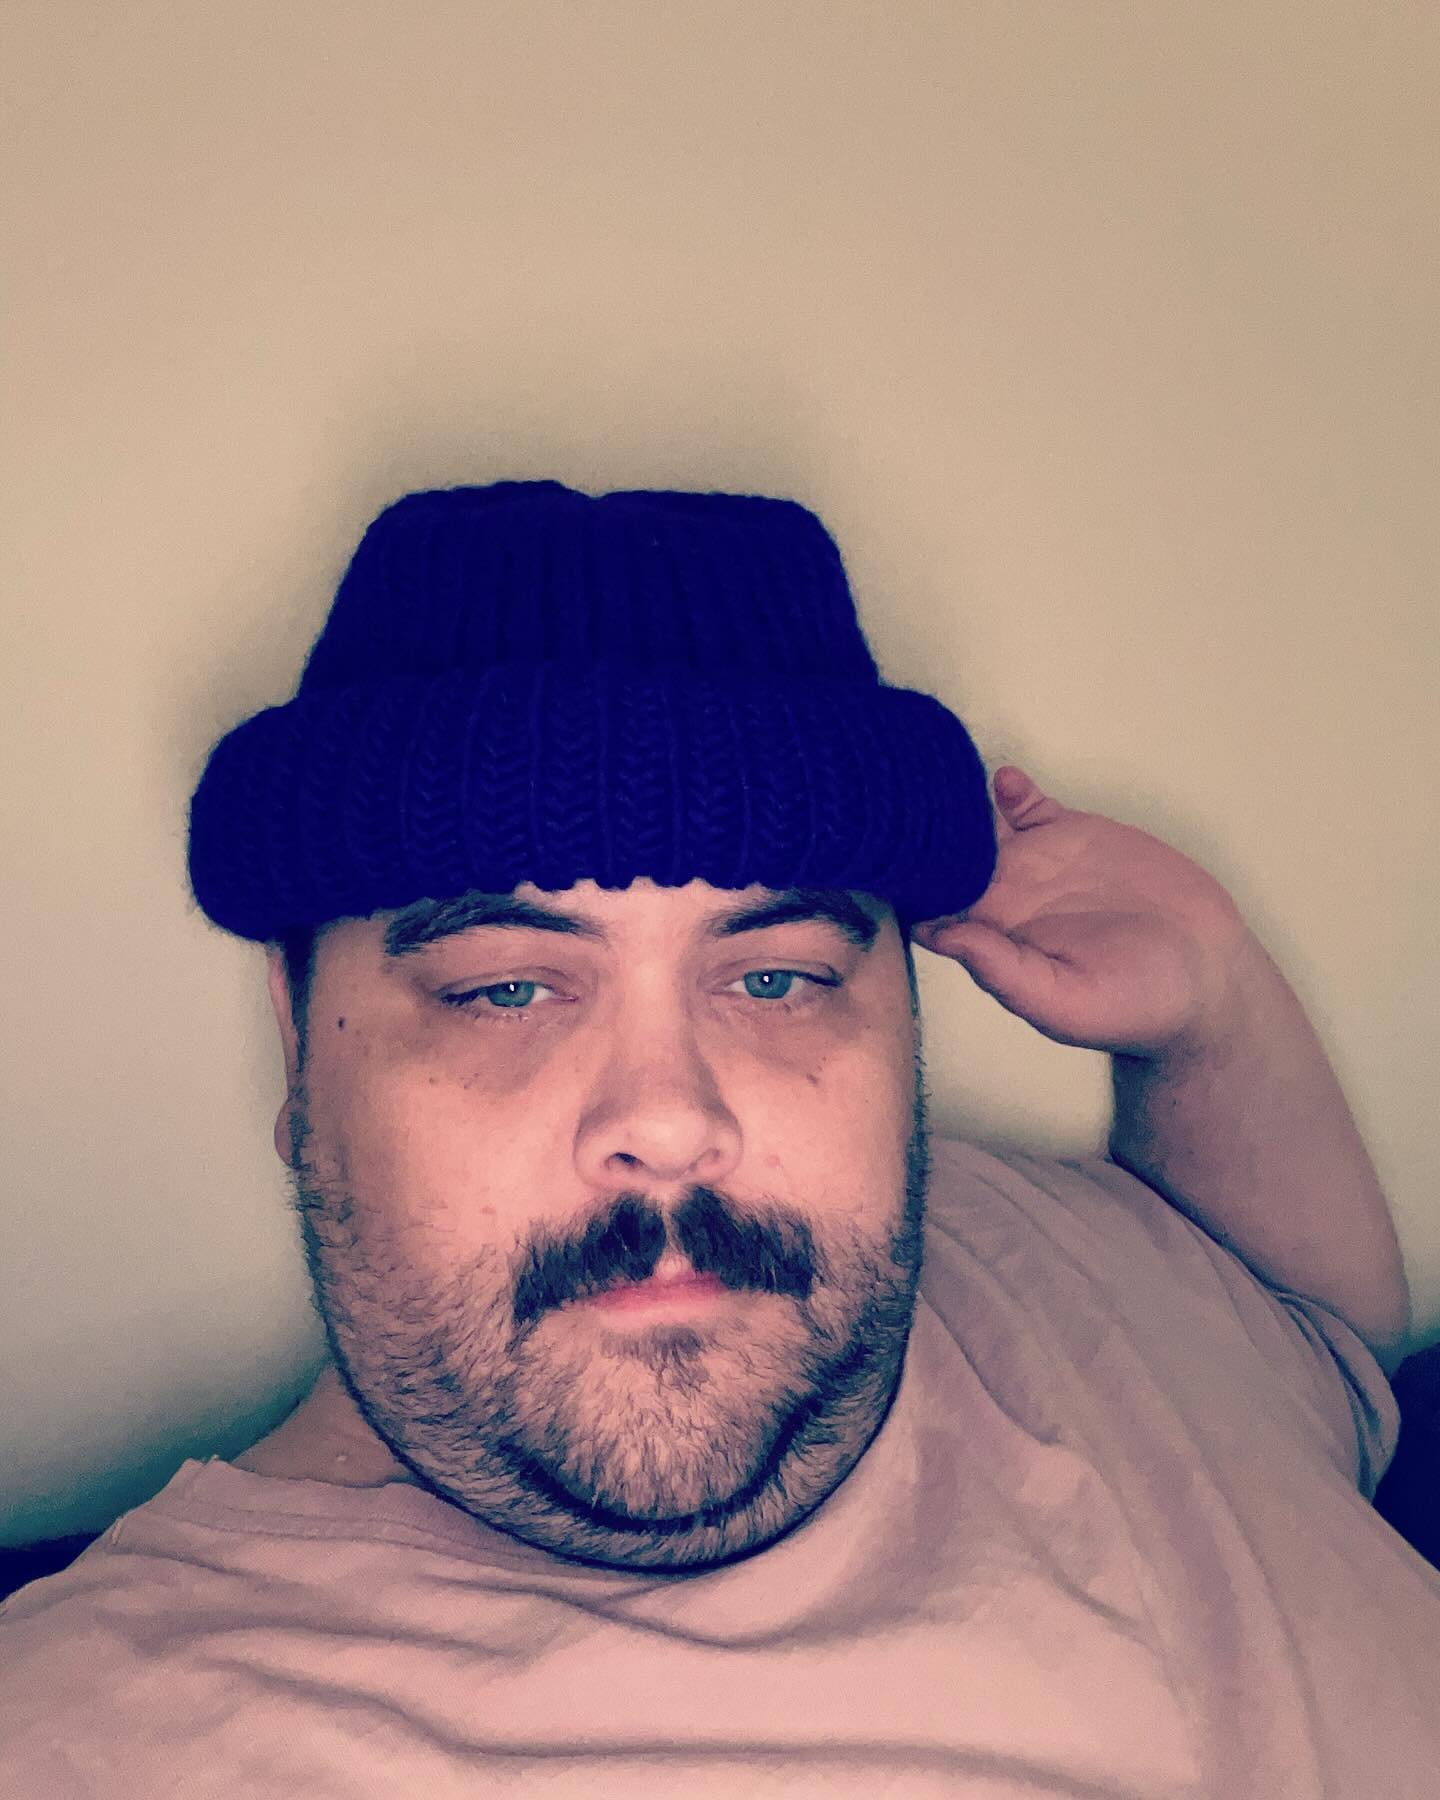 O sleep! O gentle sleep! Nature&rsquo;s soft nurse, how have I frighted thee, That thou no more wilt weigh my eyelids down And steep my senses in forgetfulness? 

Troms&oslash; Hat by @jojilocat #lambspridebulky from @downtownyarns #menwhoknit #menkn